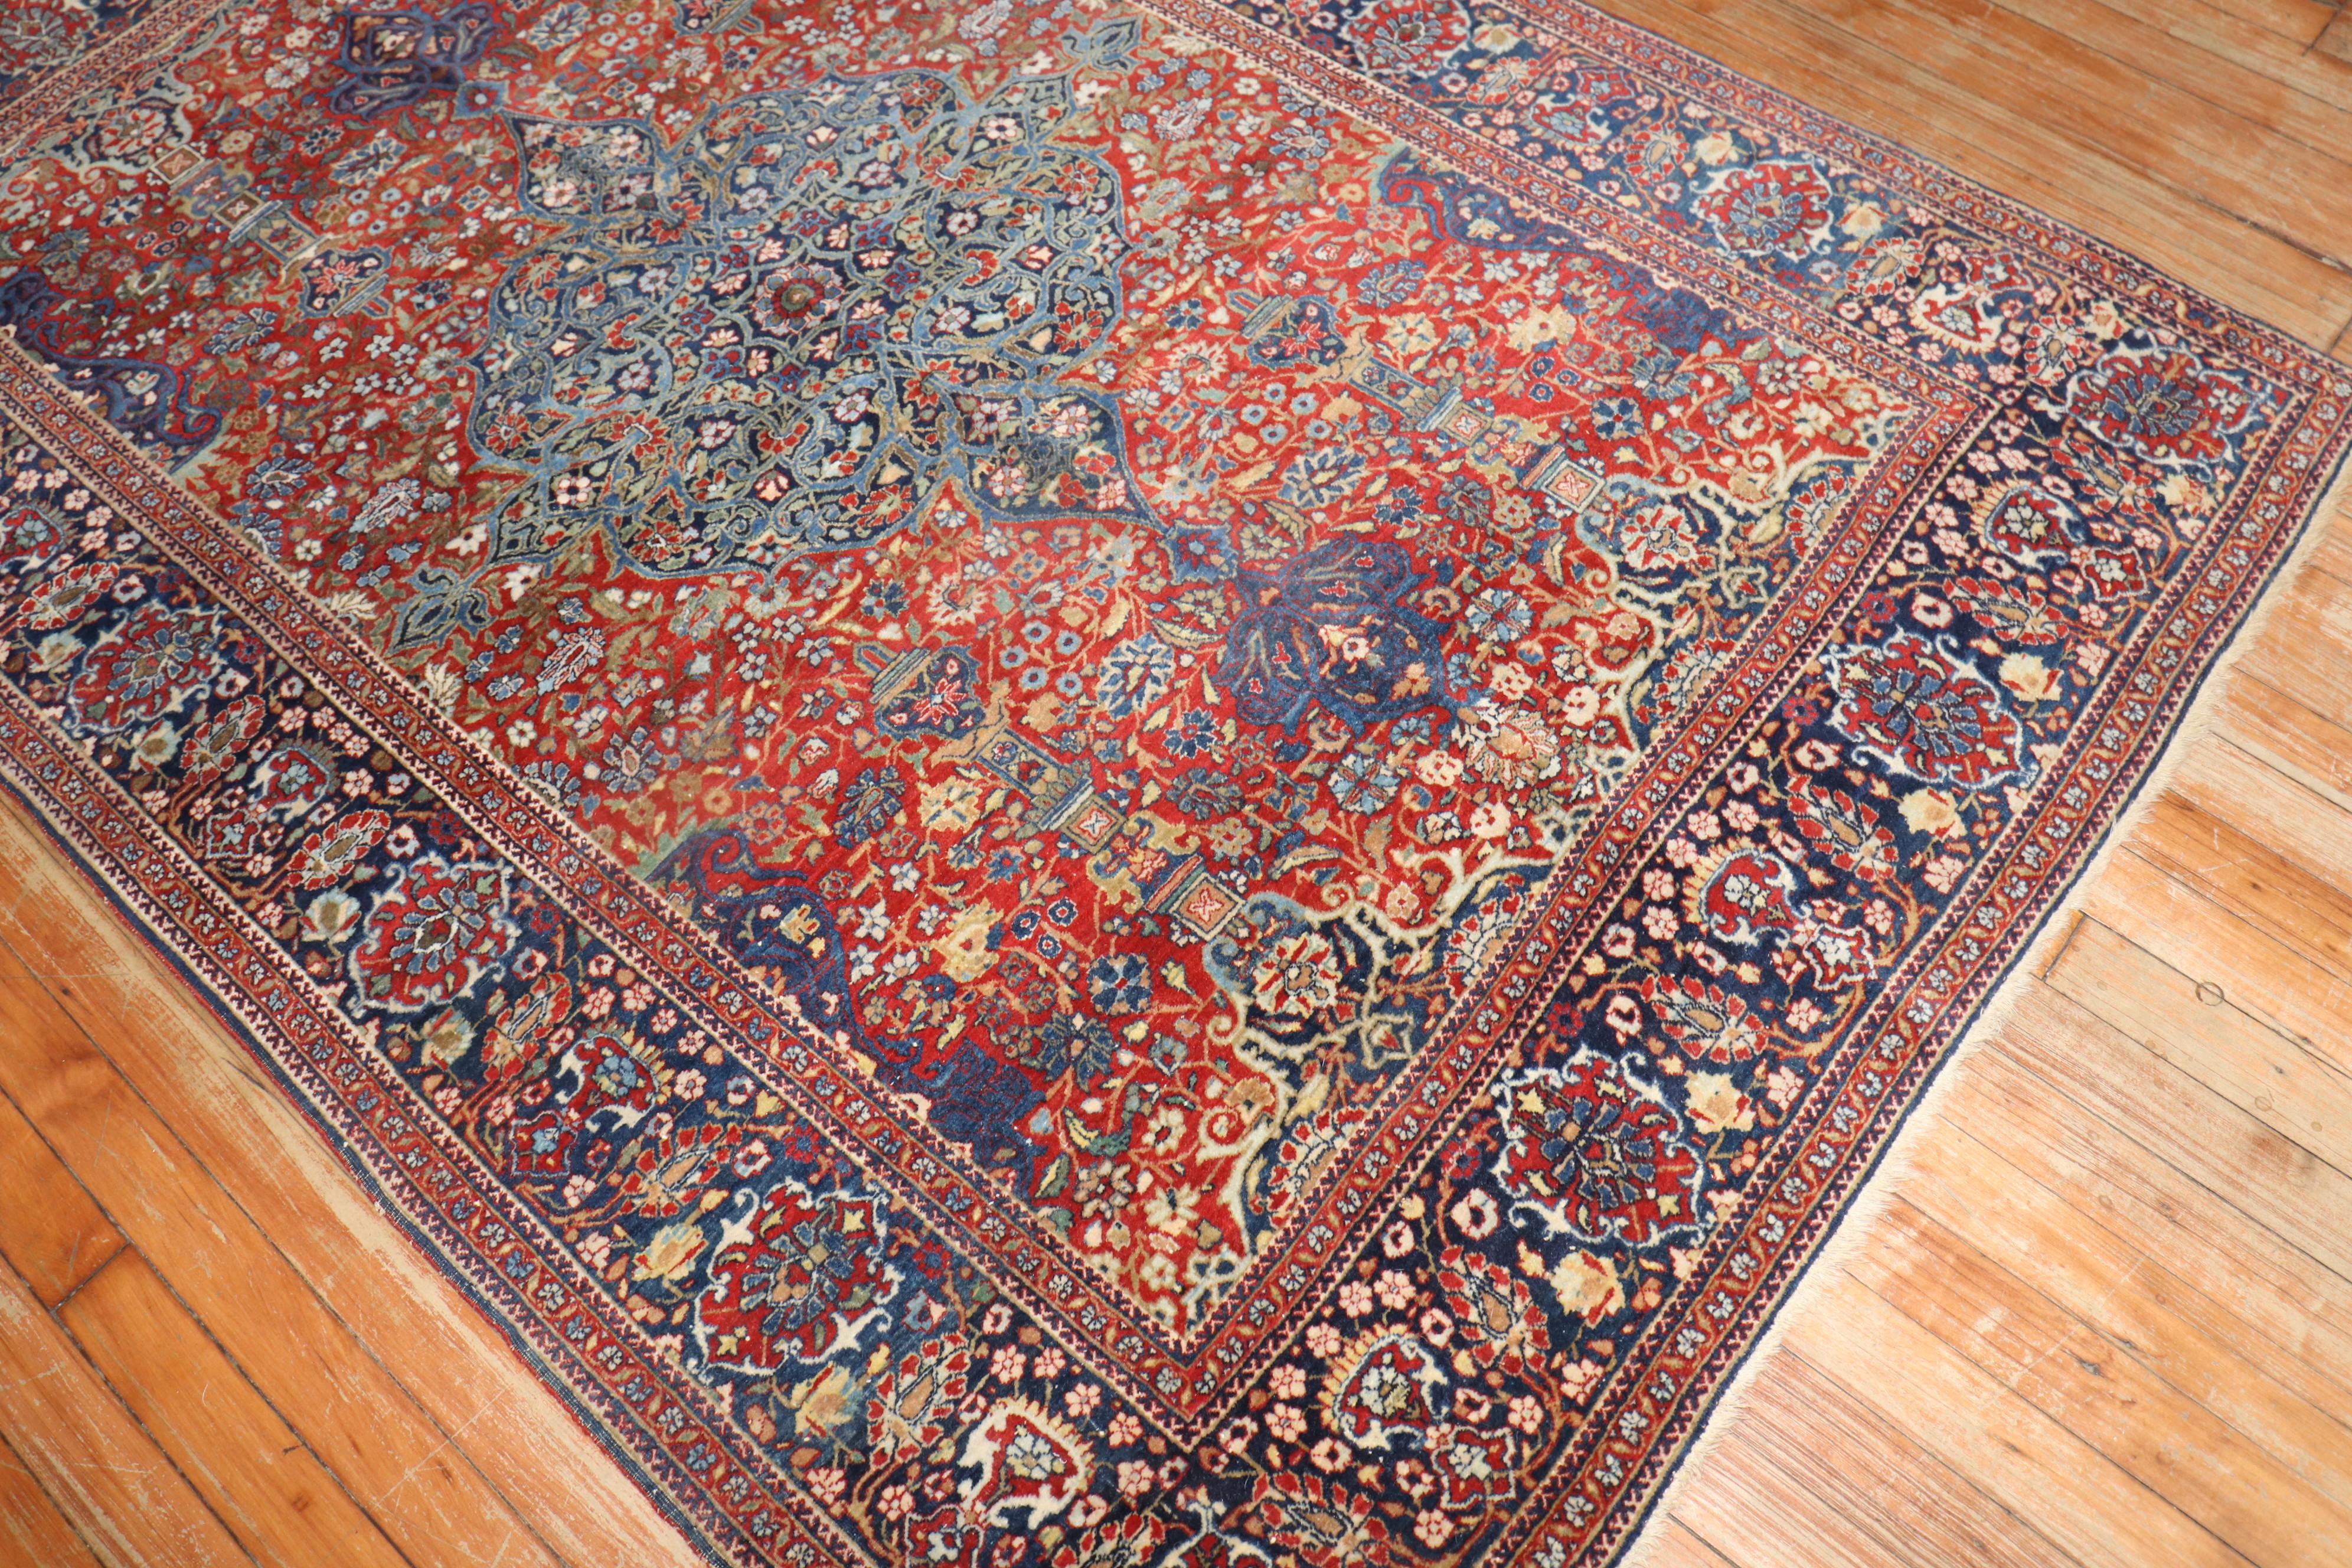 Collector Level Antique Persian Kashan Rug 4